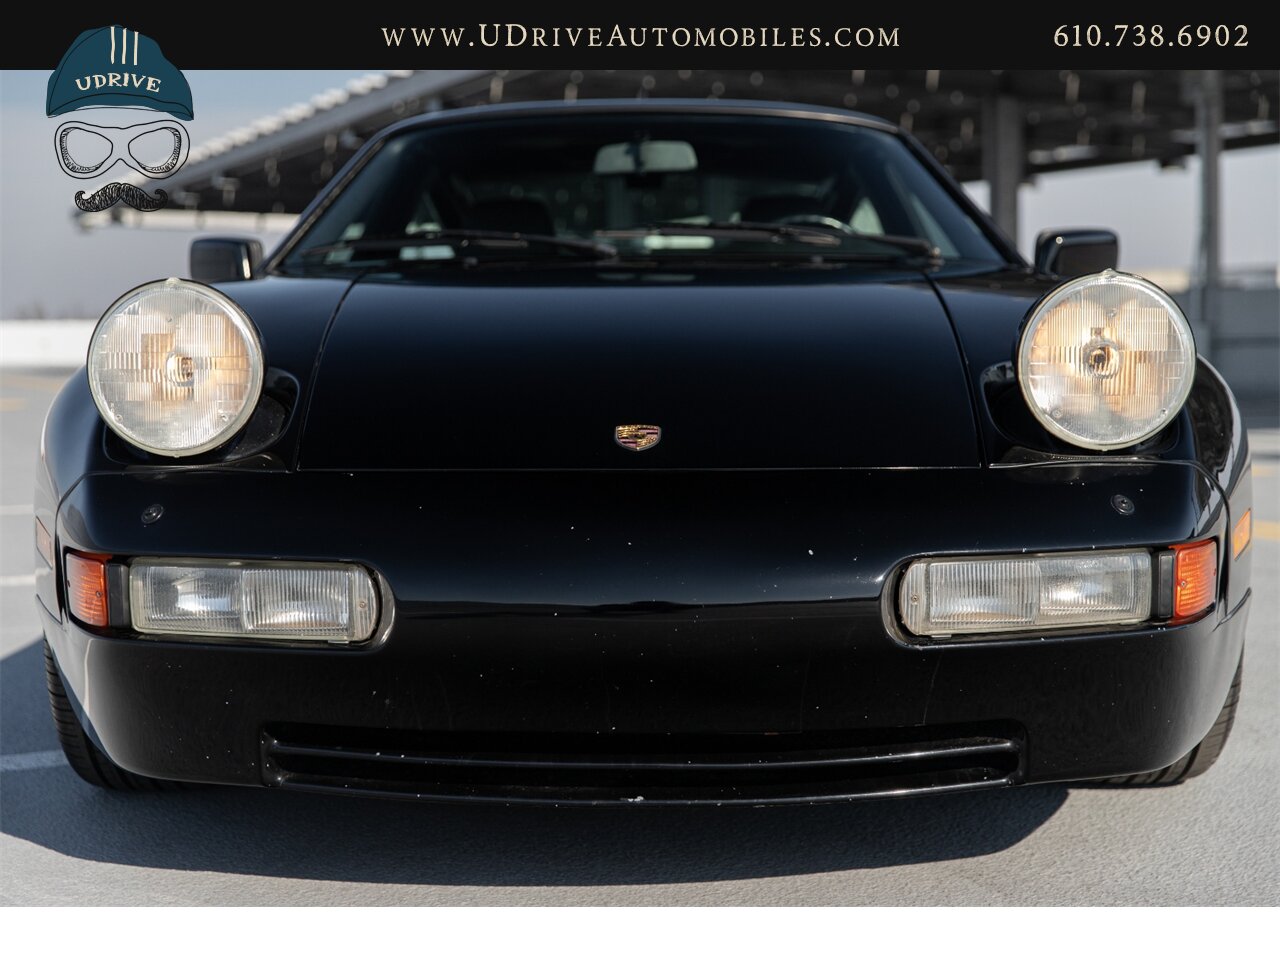 1990 Porsche 928 S4 $58k in Service History Since 2014   - Photo 12 - West Chester, PA 19382